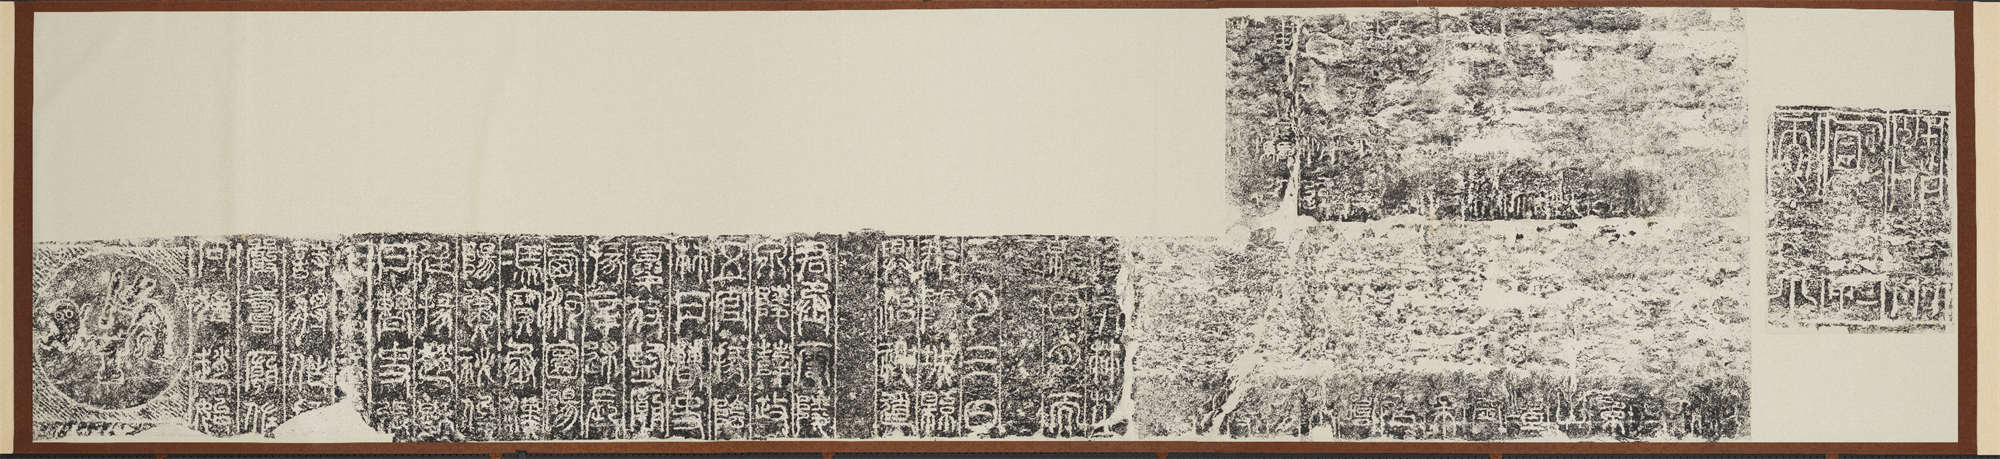 Rubbing of Shaoshi Gate Tower with Inscription at Songshanpreview